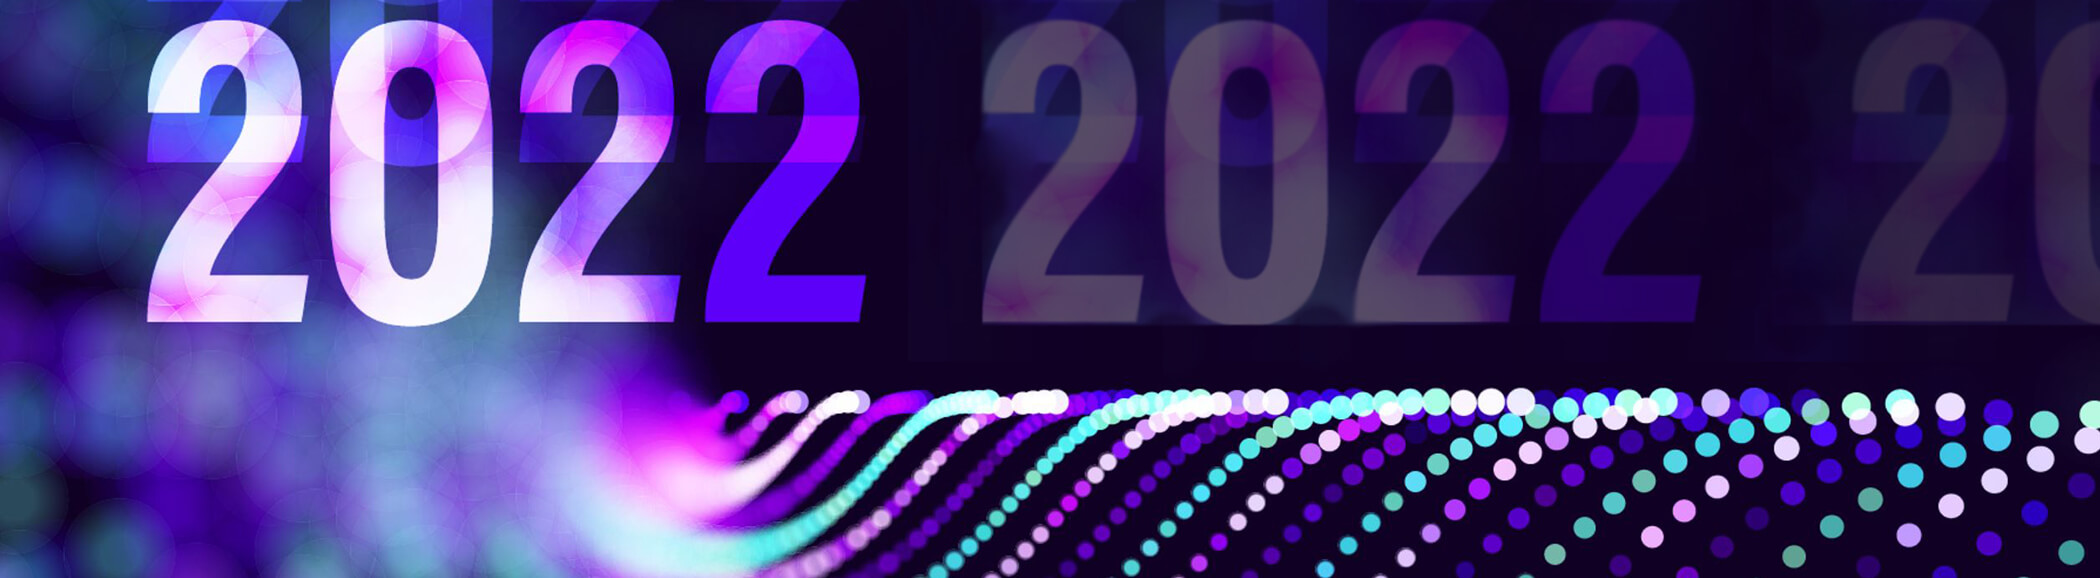 2022 on abstract purple background